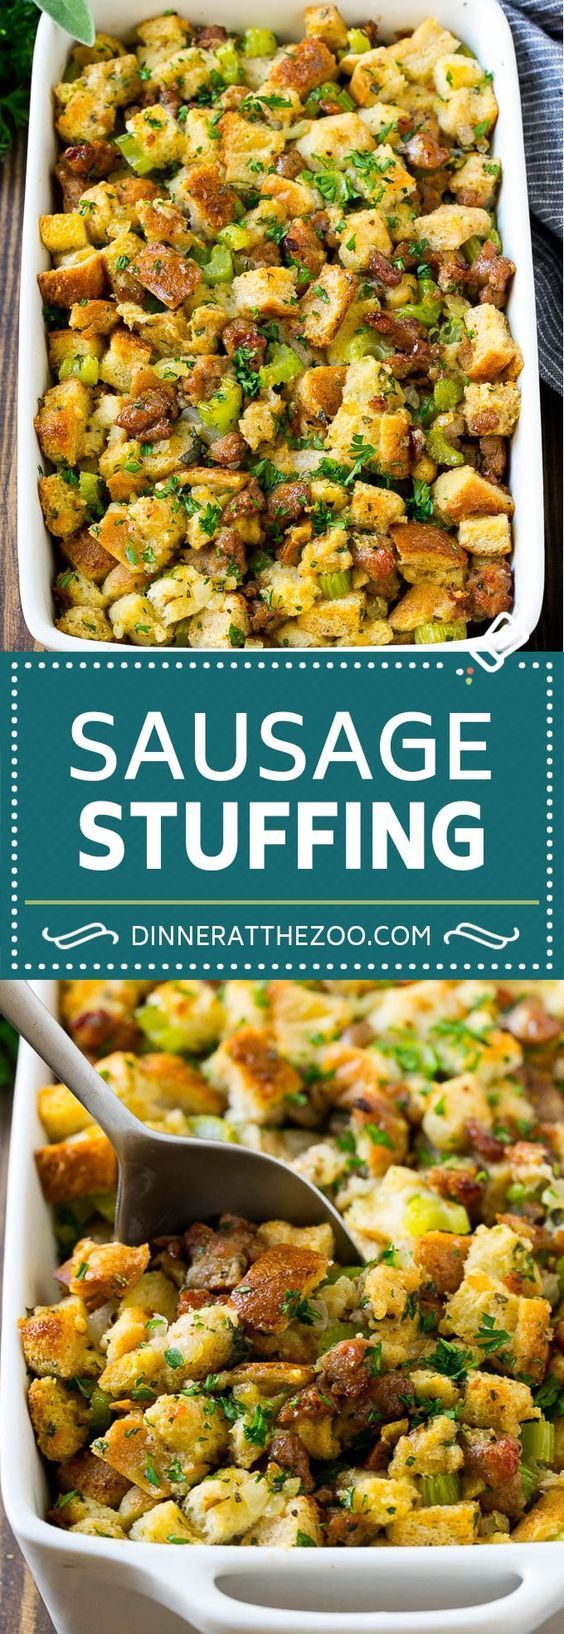 Sausage Stuffing - Dinner at the Zoo -   19 thanksgiving sides recipes make ahead ideas